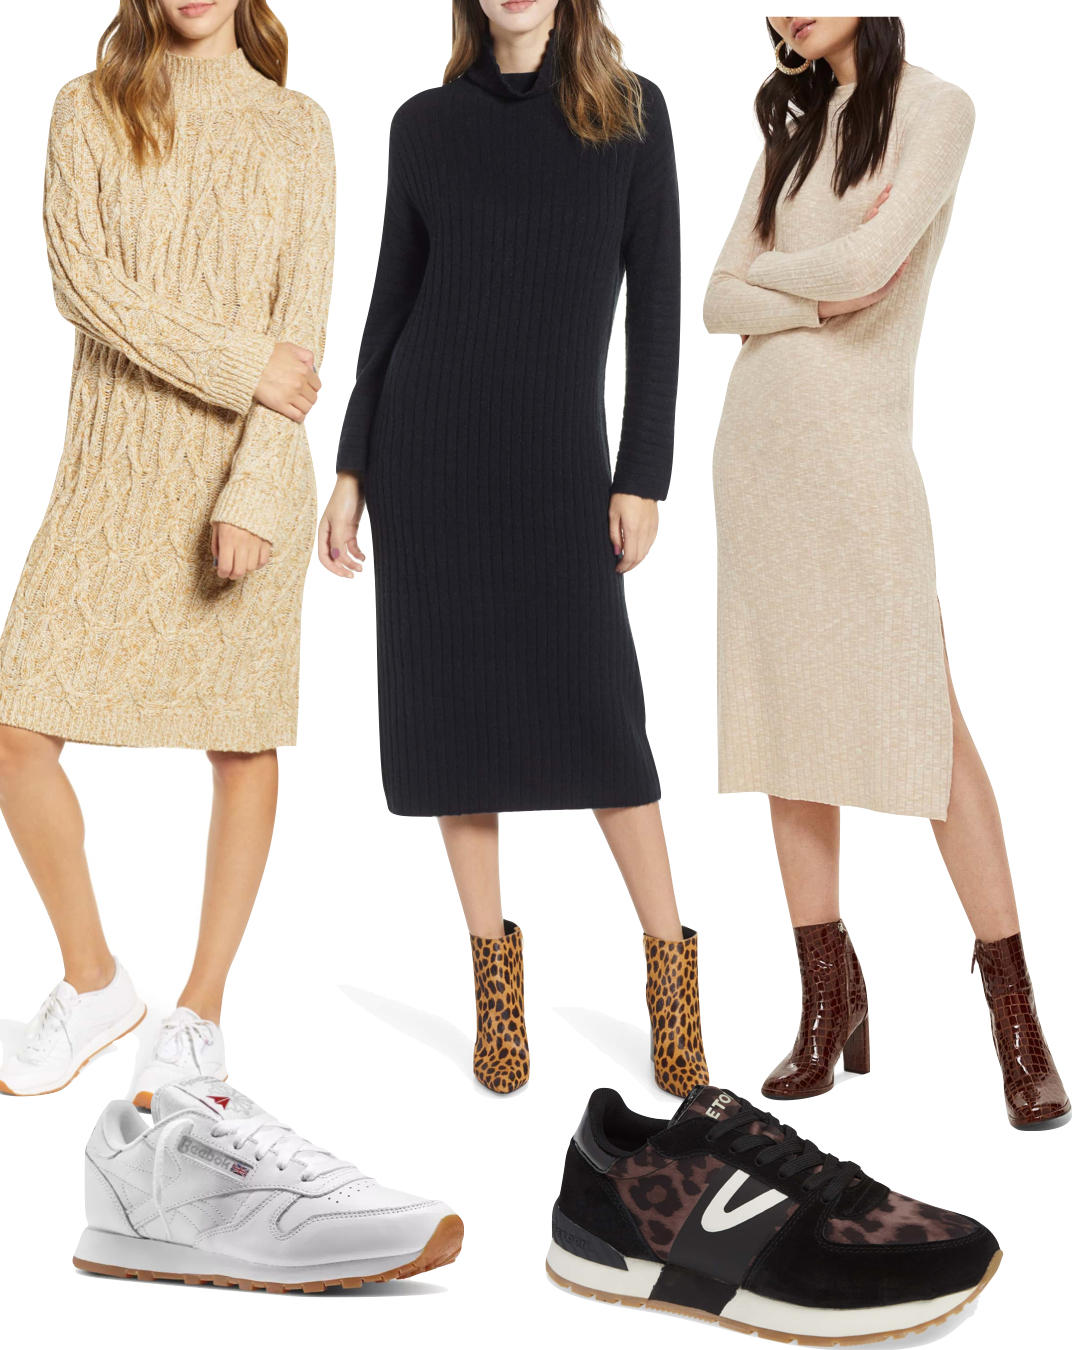 Sweater Dresses with Sneakers